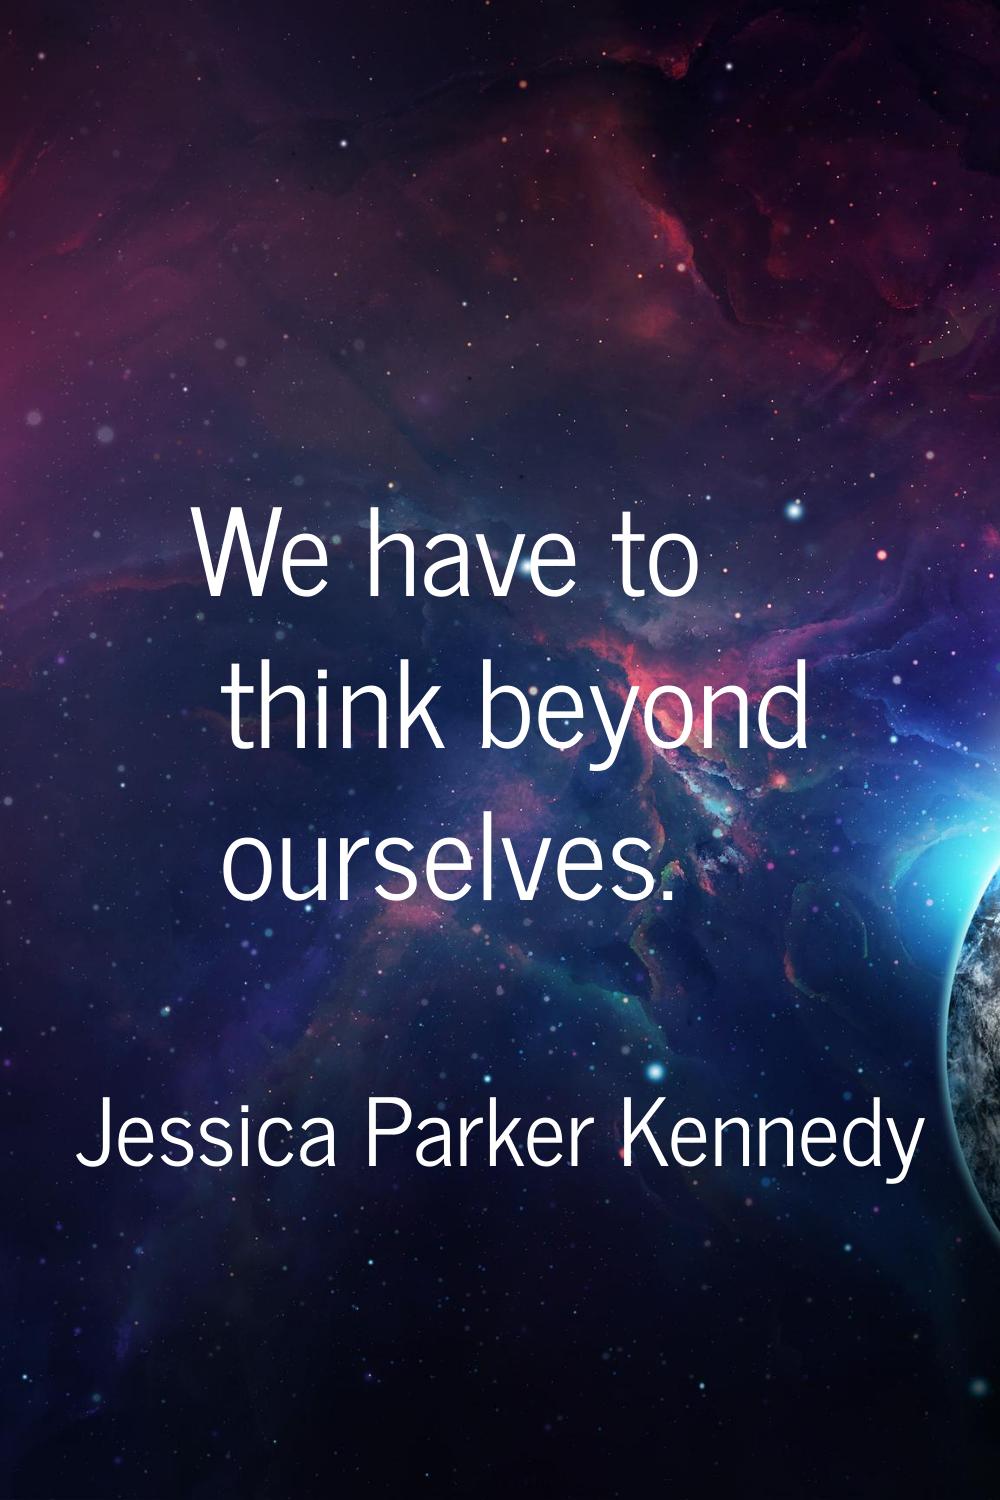 We have to think beyond ourselves.